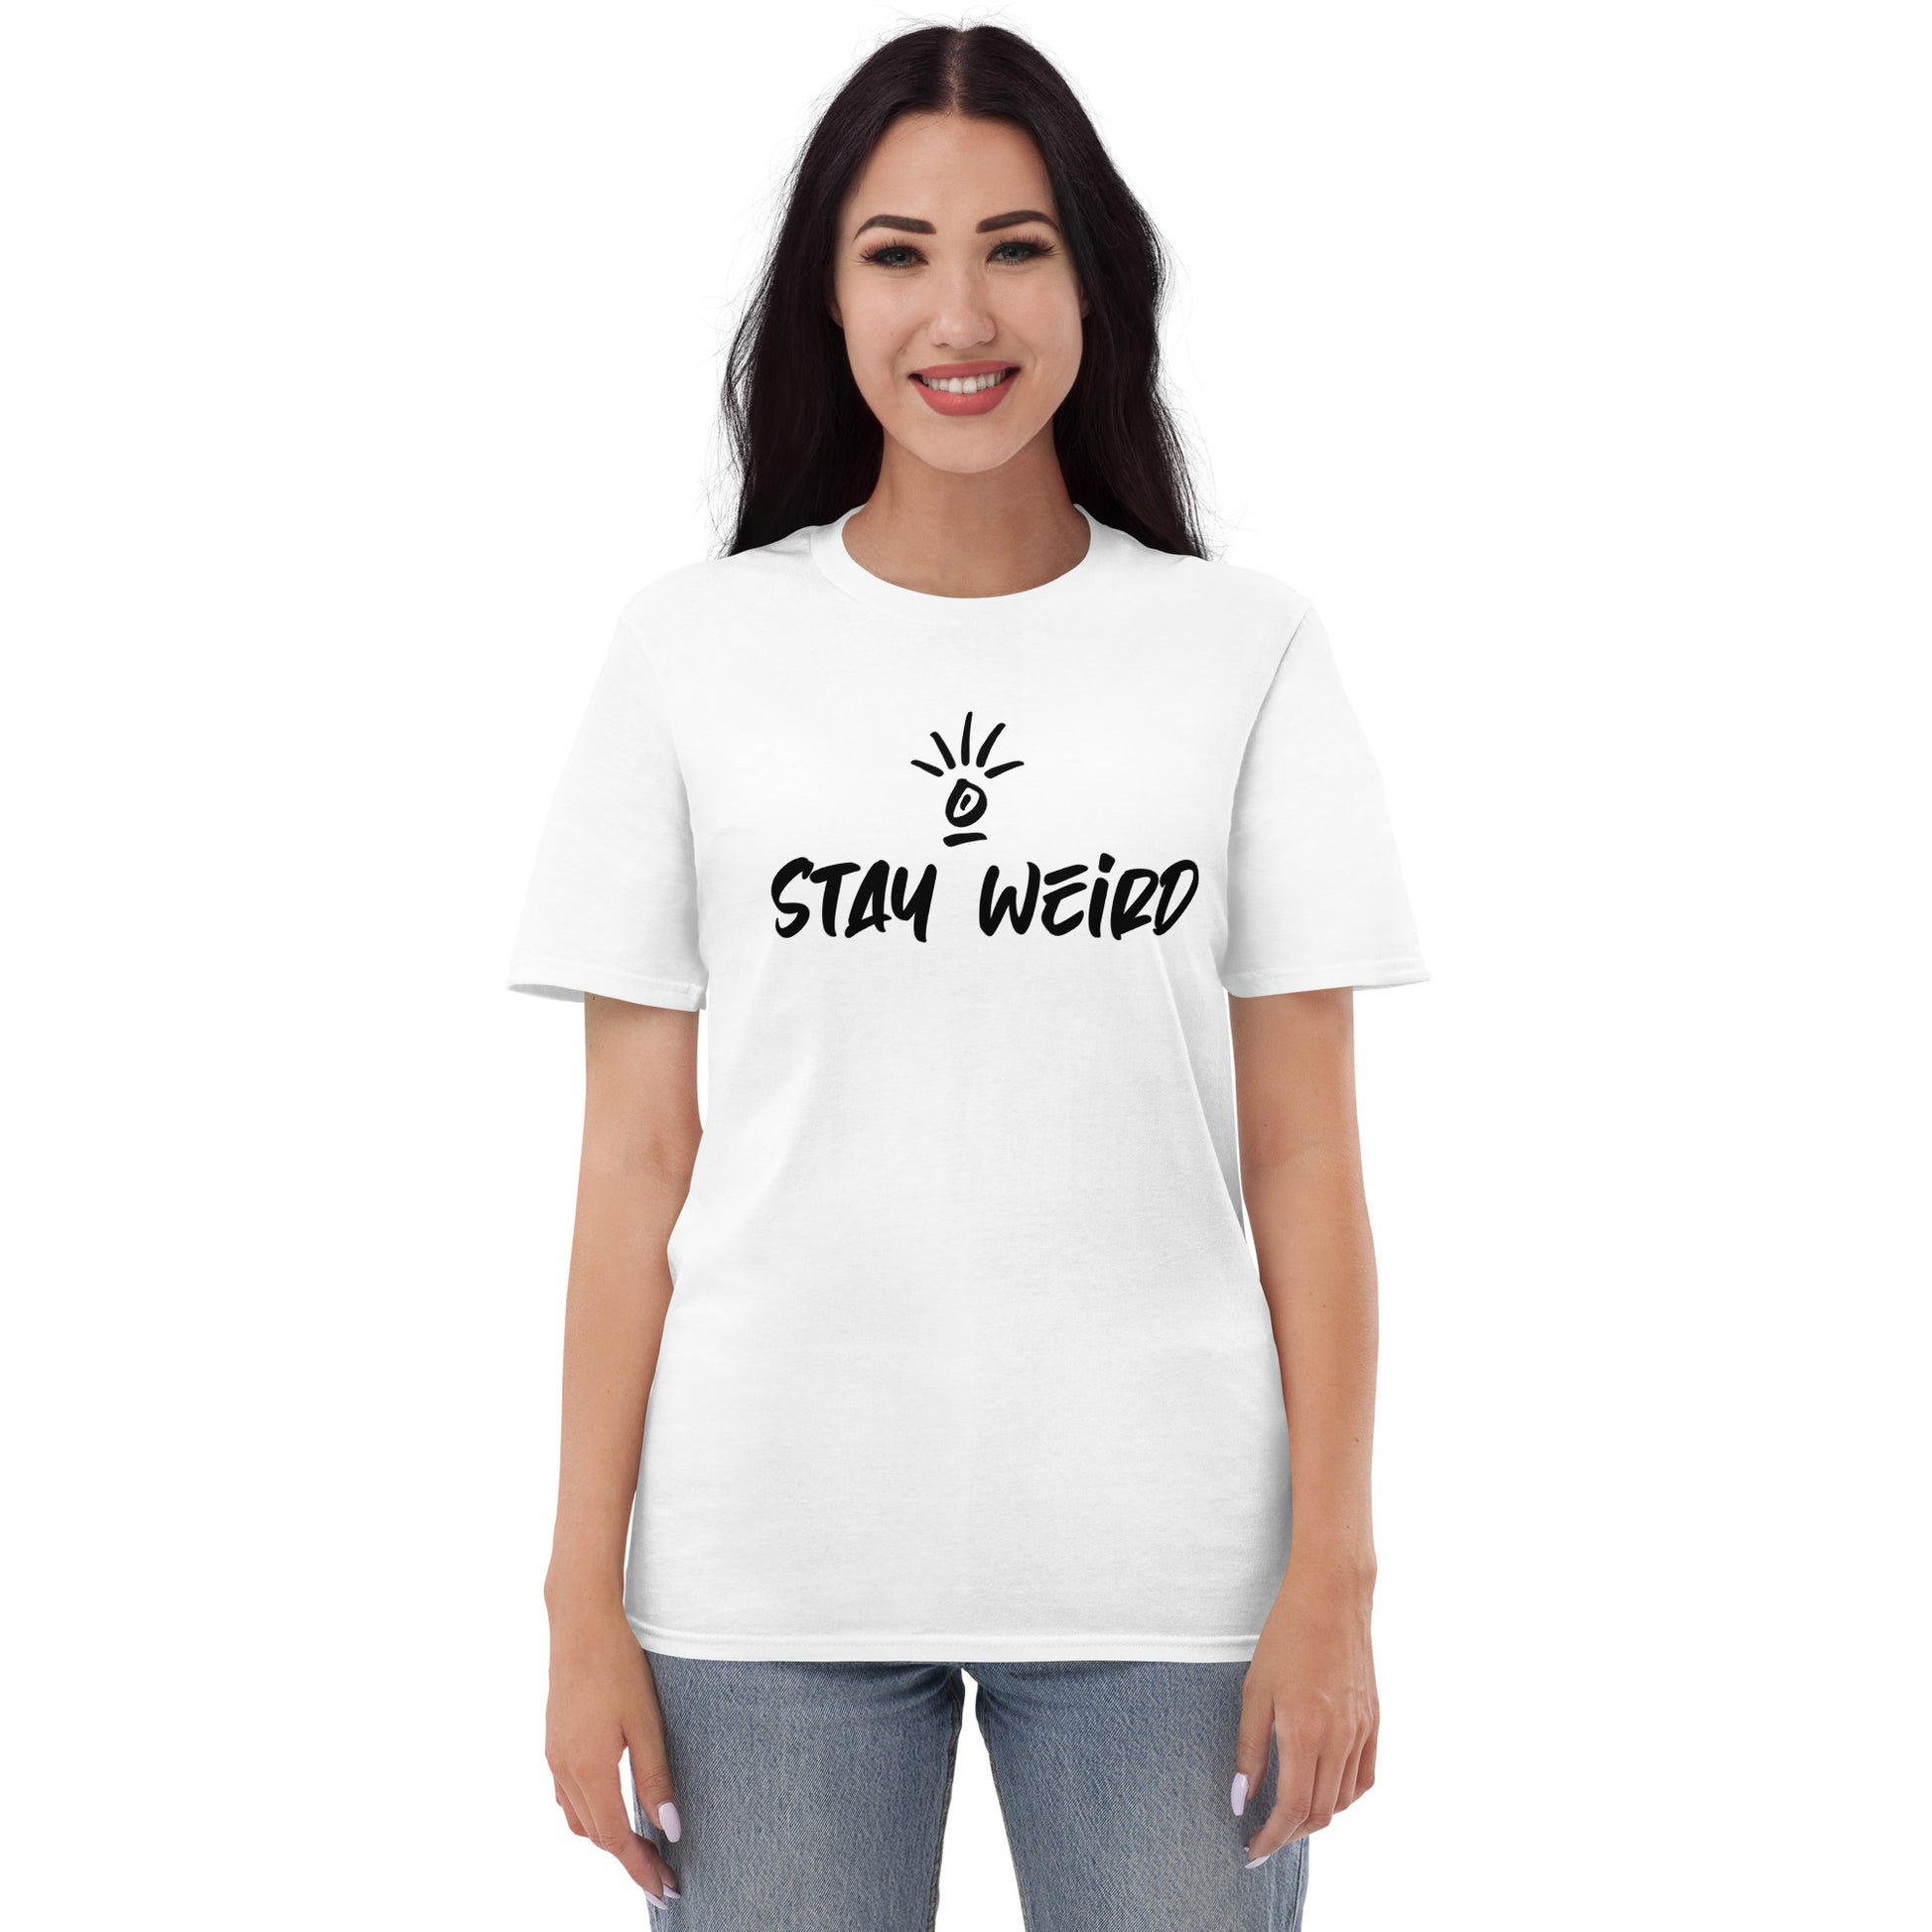 Stay Weird - Don't Let A Bad Yesterday Ruin A Good Today' T-Shirt on a model, promoting positivity and embracing life's unique journey.